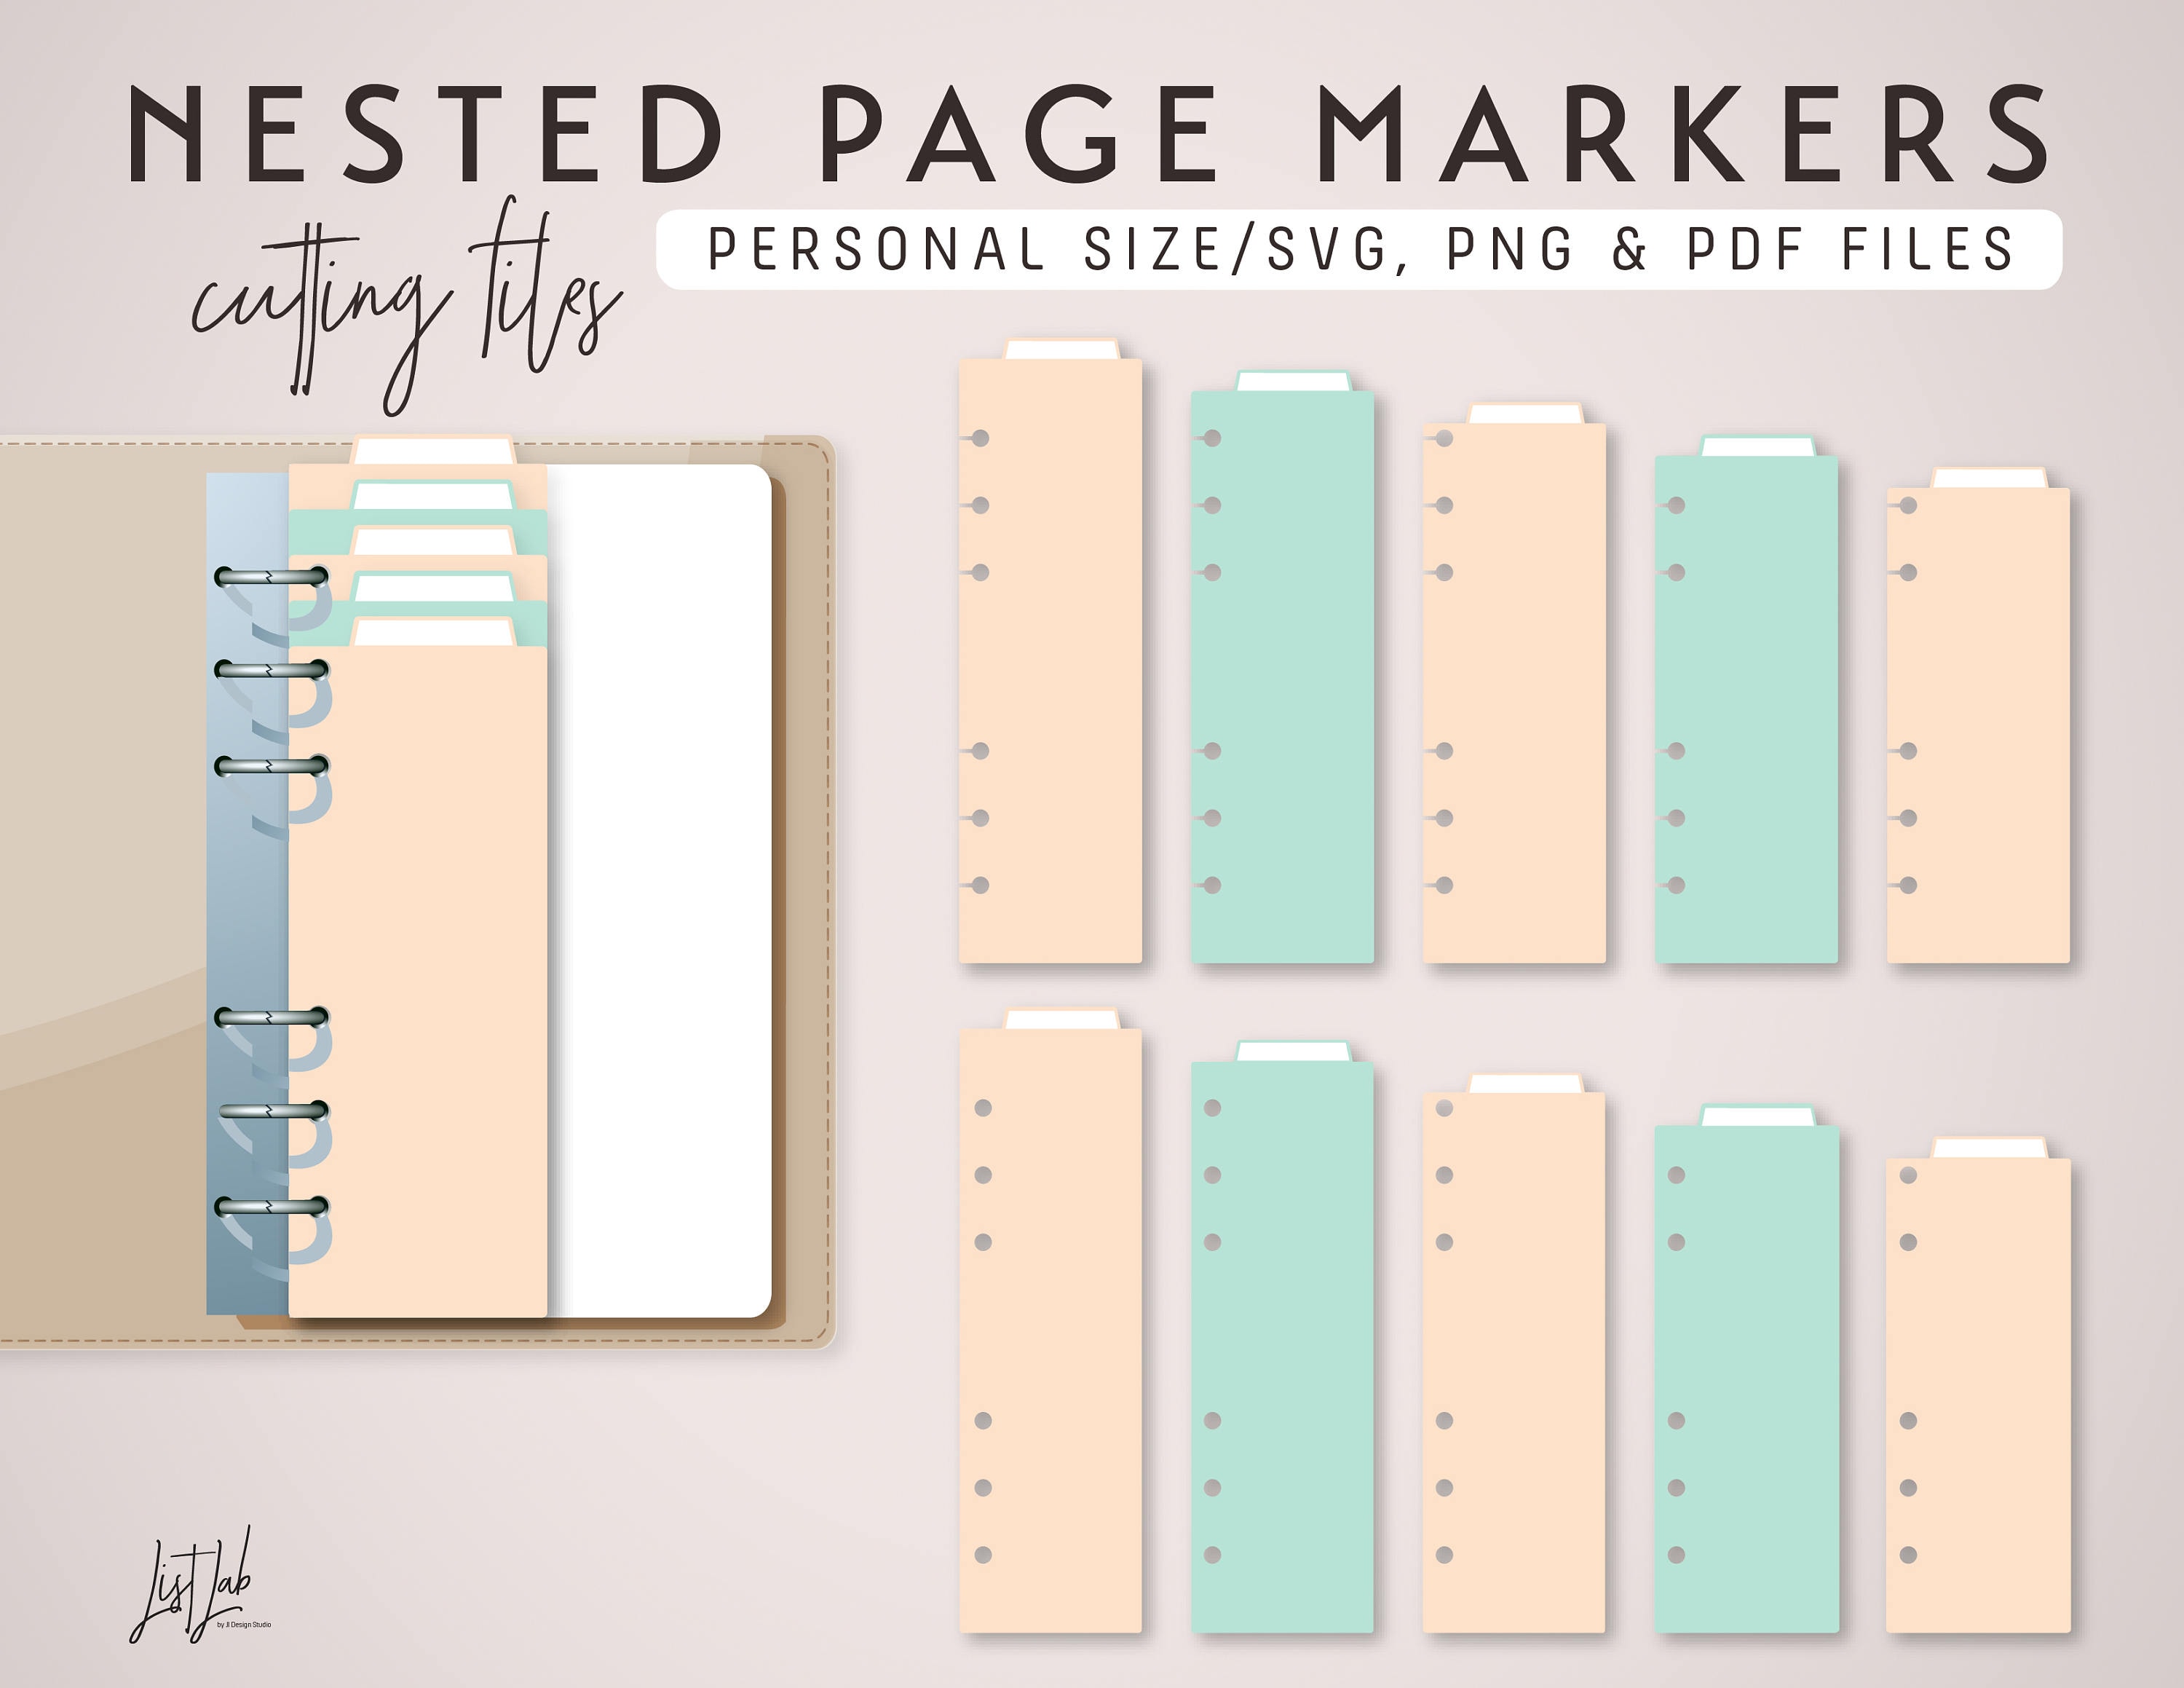 MINI Disc 5 Nested PAGE MARKERS Discbound Planner Die Cutting Files Set  Cutting Template Svg, Png, Pdf Diy Planner 